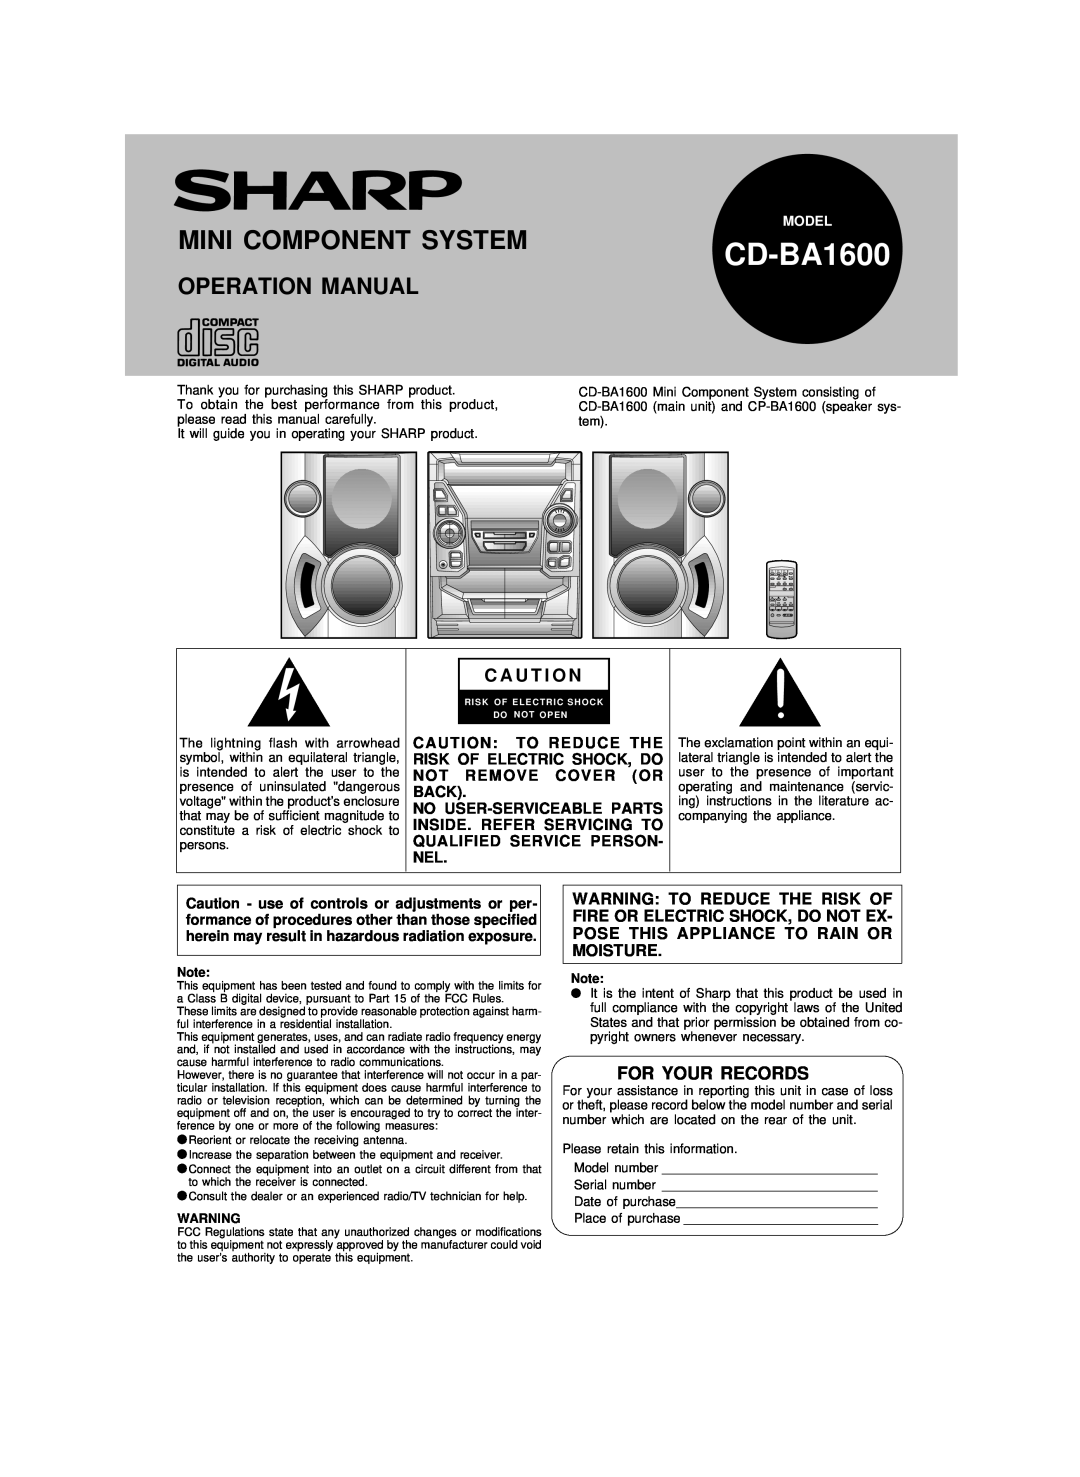 Sharp CD-BA1600 operation manual Mini Component System, C A U T I O N, For Your Records 